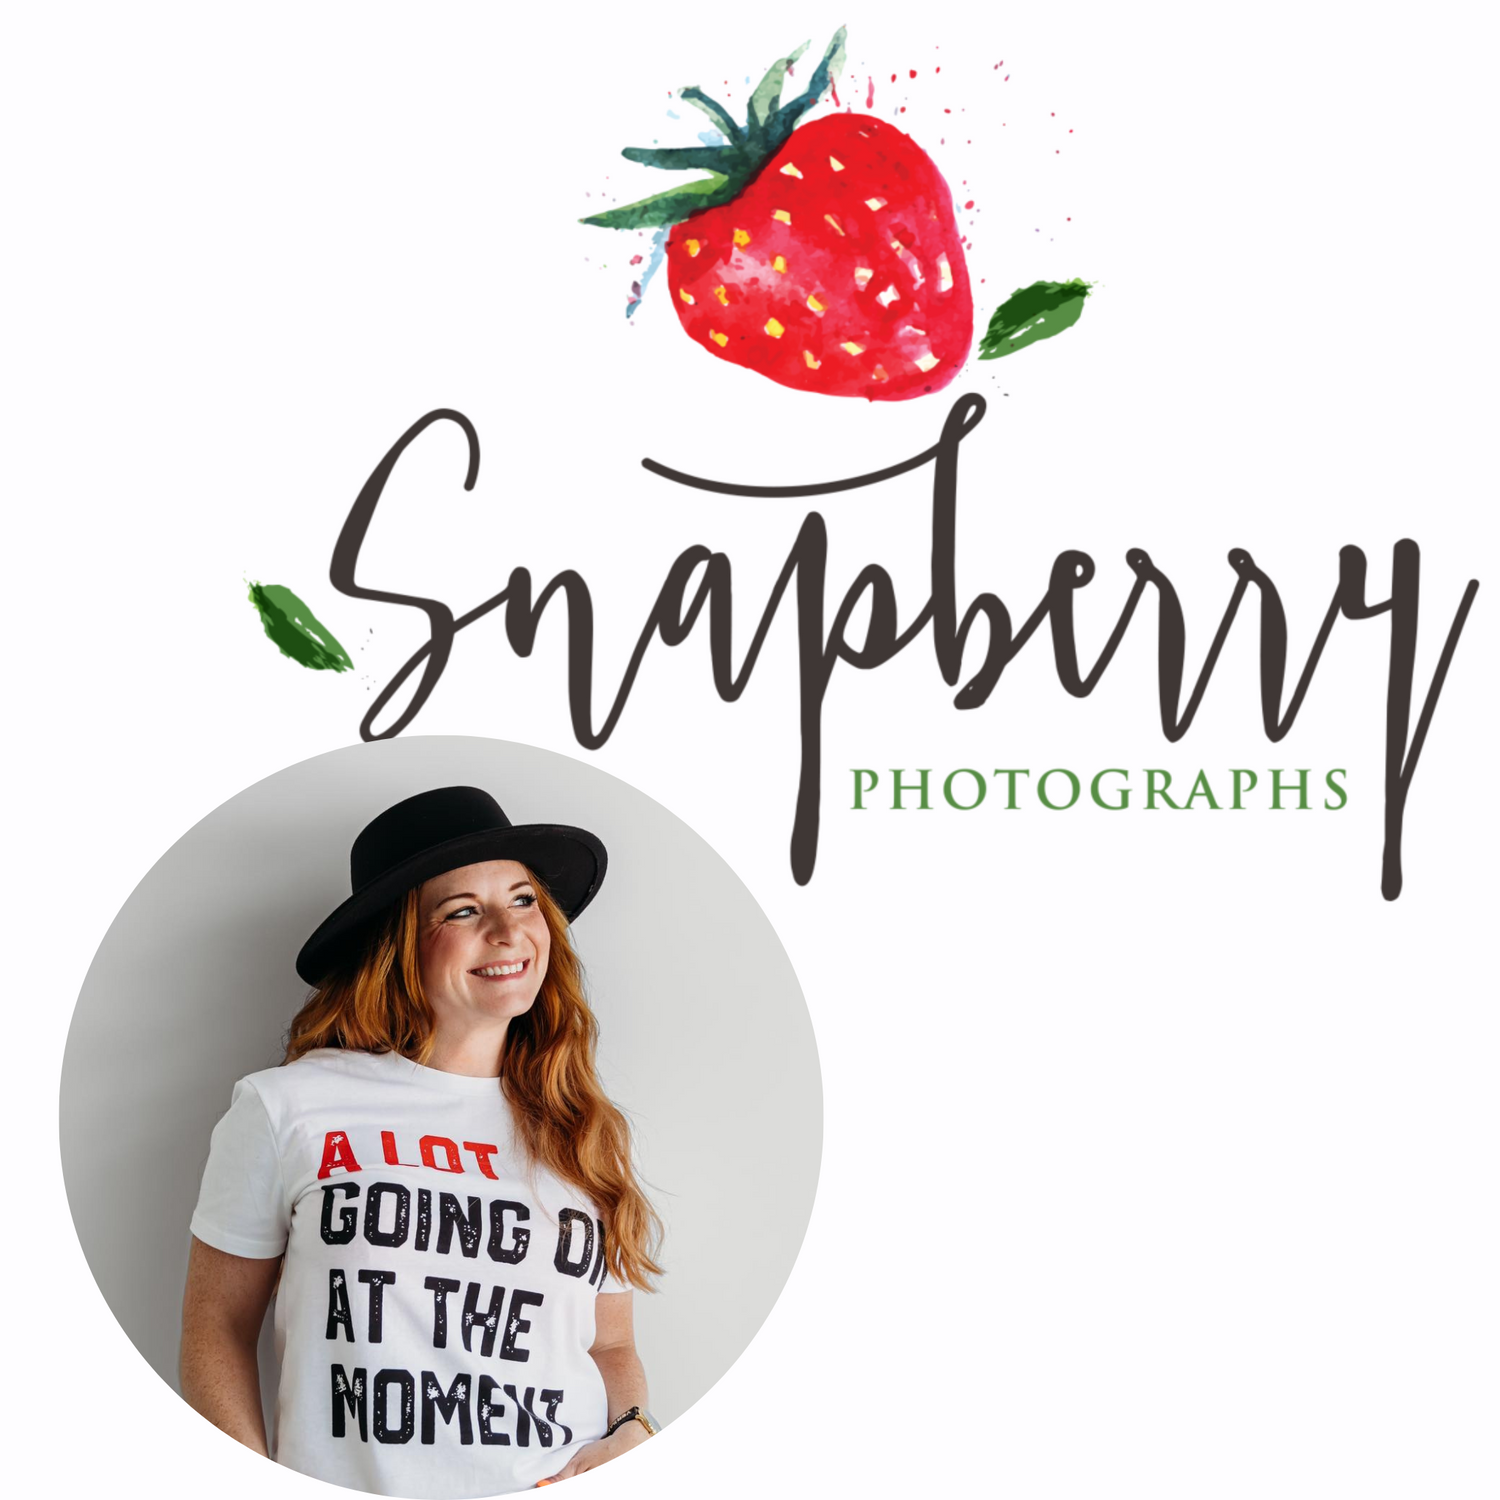 Jenna Sefkow, owner and founder of Snapberry Photography who did self published author Lindsay Dain's photographs of her and her books published on Amazon KDP